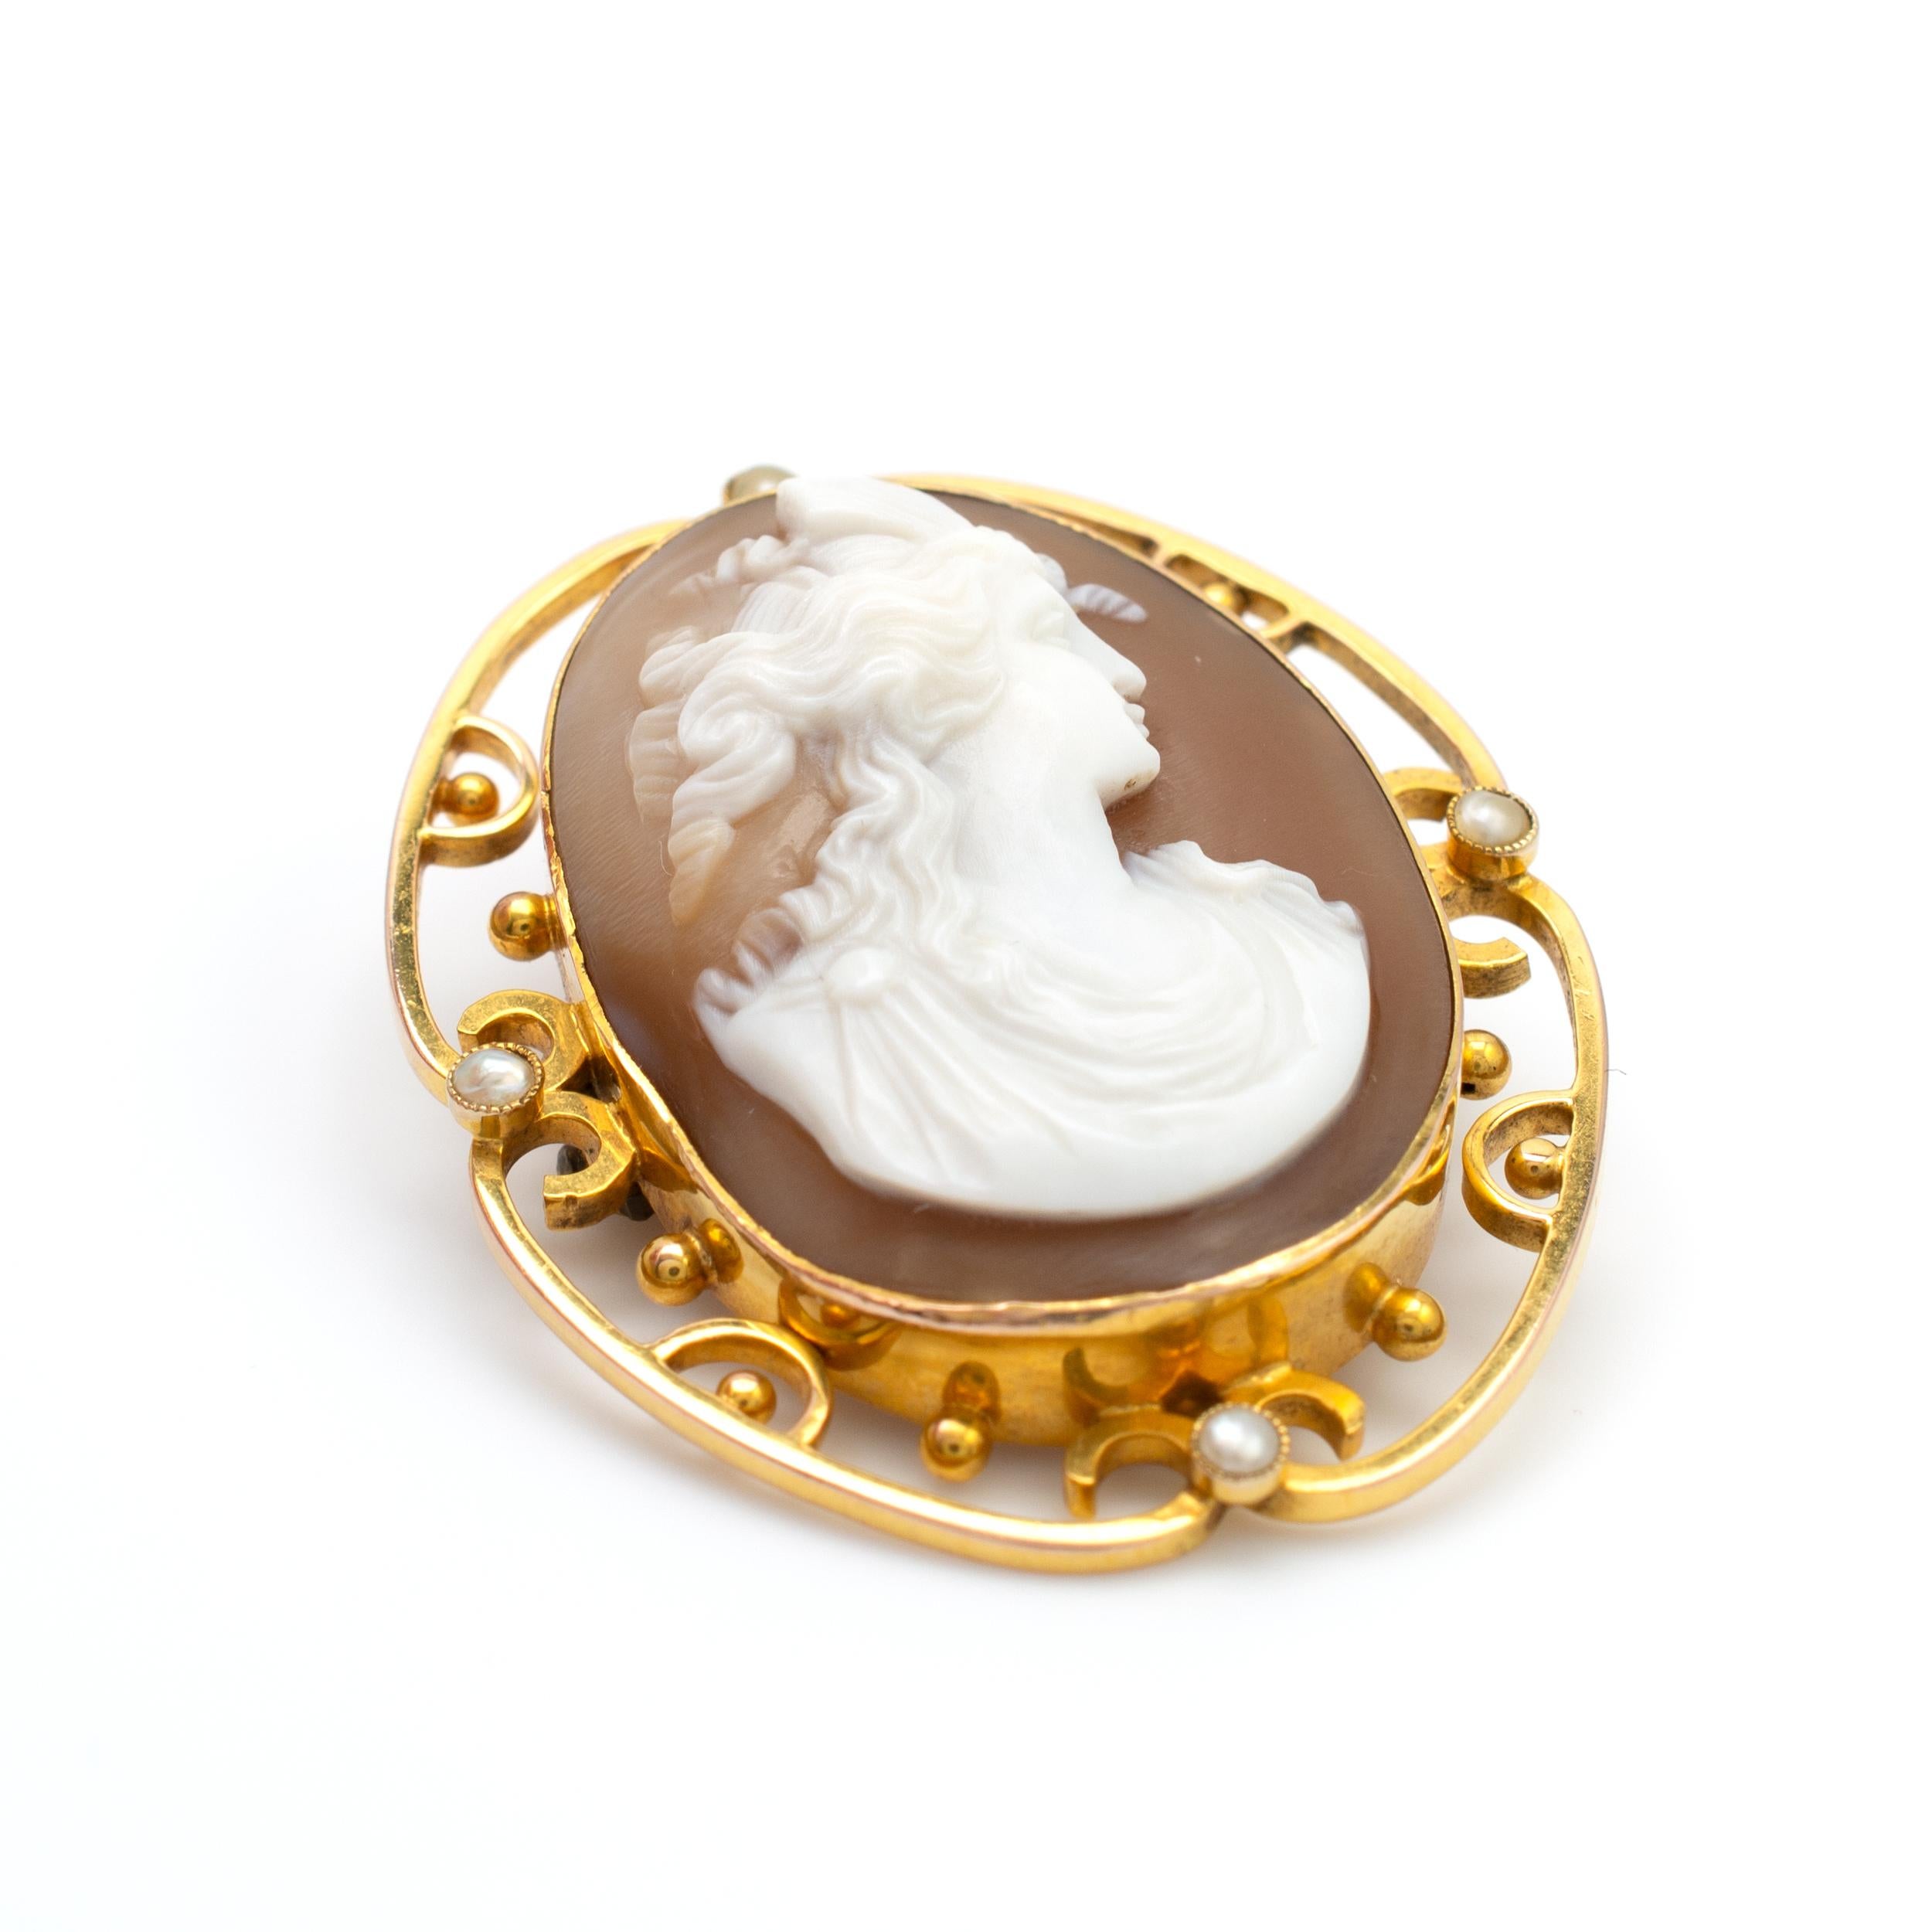 This antique 9 karat gold cameo brooch features a decorative gold frame set with pearls. 

The shell carving is beautifully executed showing, in relief, a defined female portrait with layered detail.

The cameo is neatly set and beautifully framed